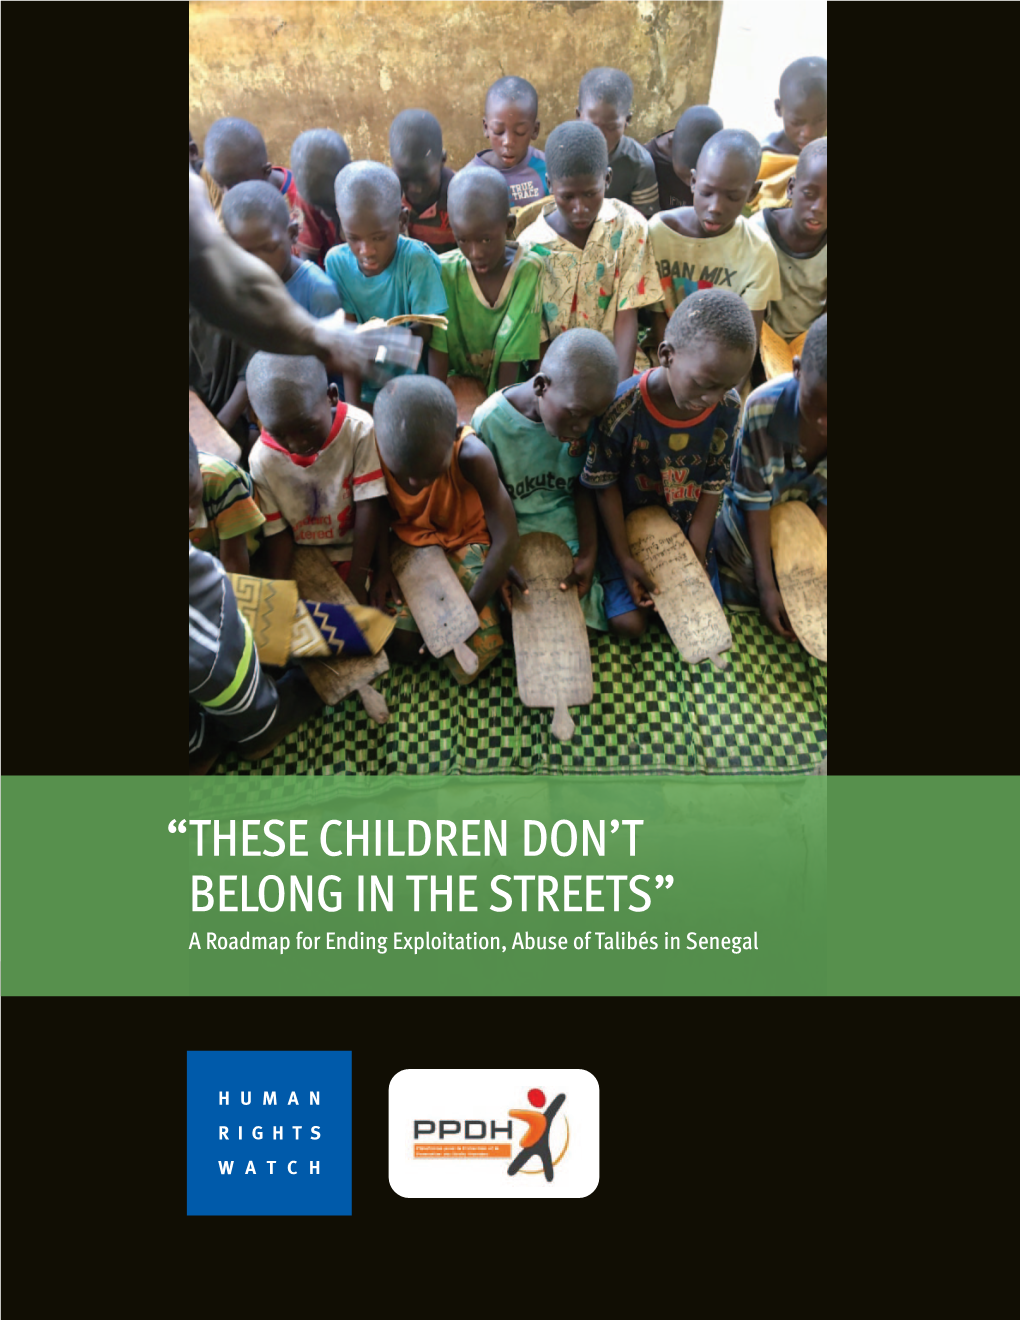 “These Children Don't Belong in the Streets” a Roadmap for Ending Exploitation, Abuse of Talibés in Senegal